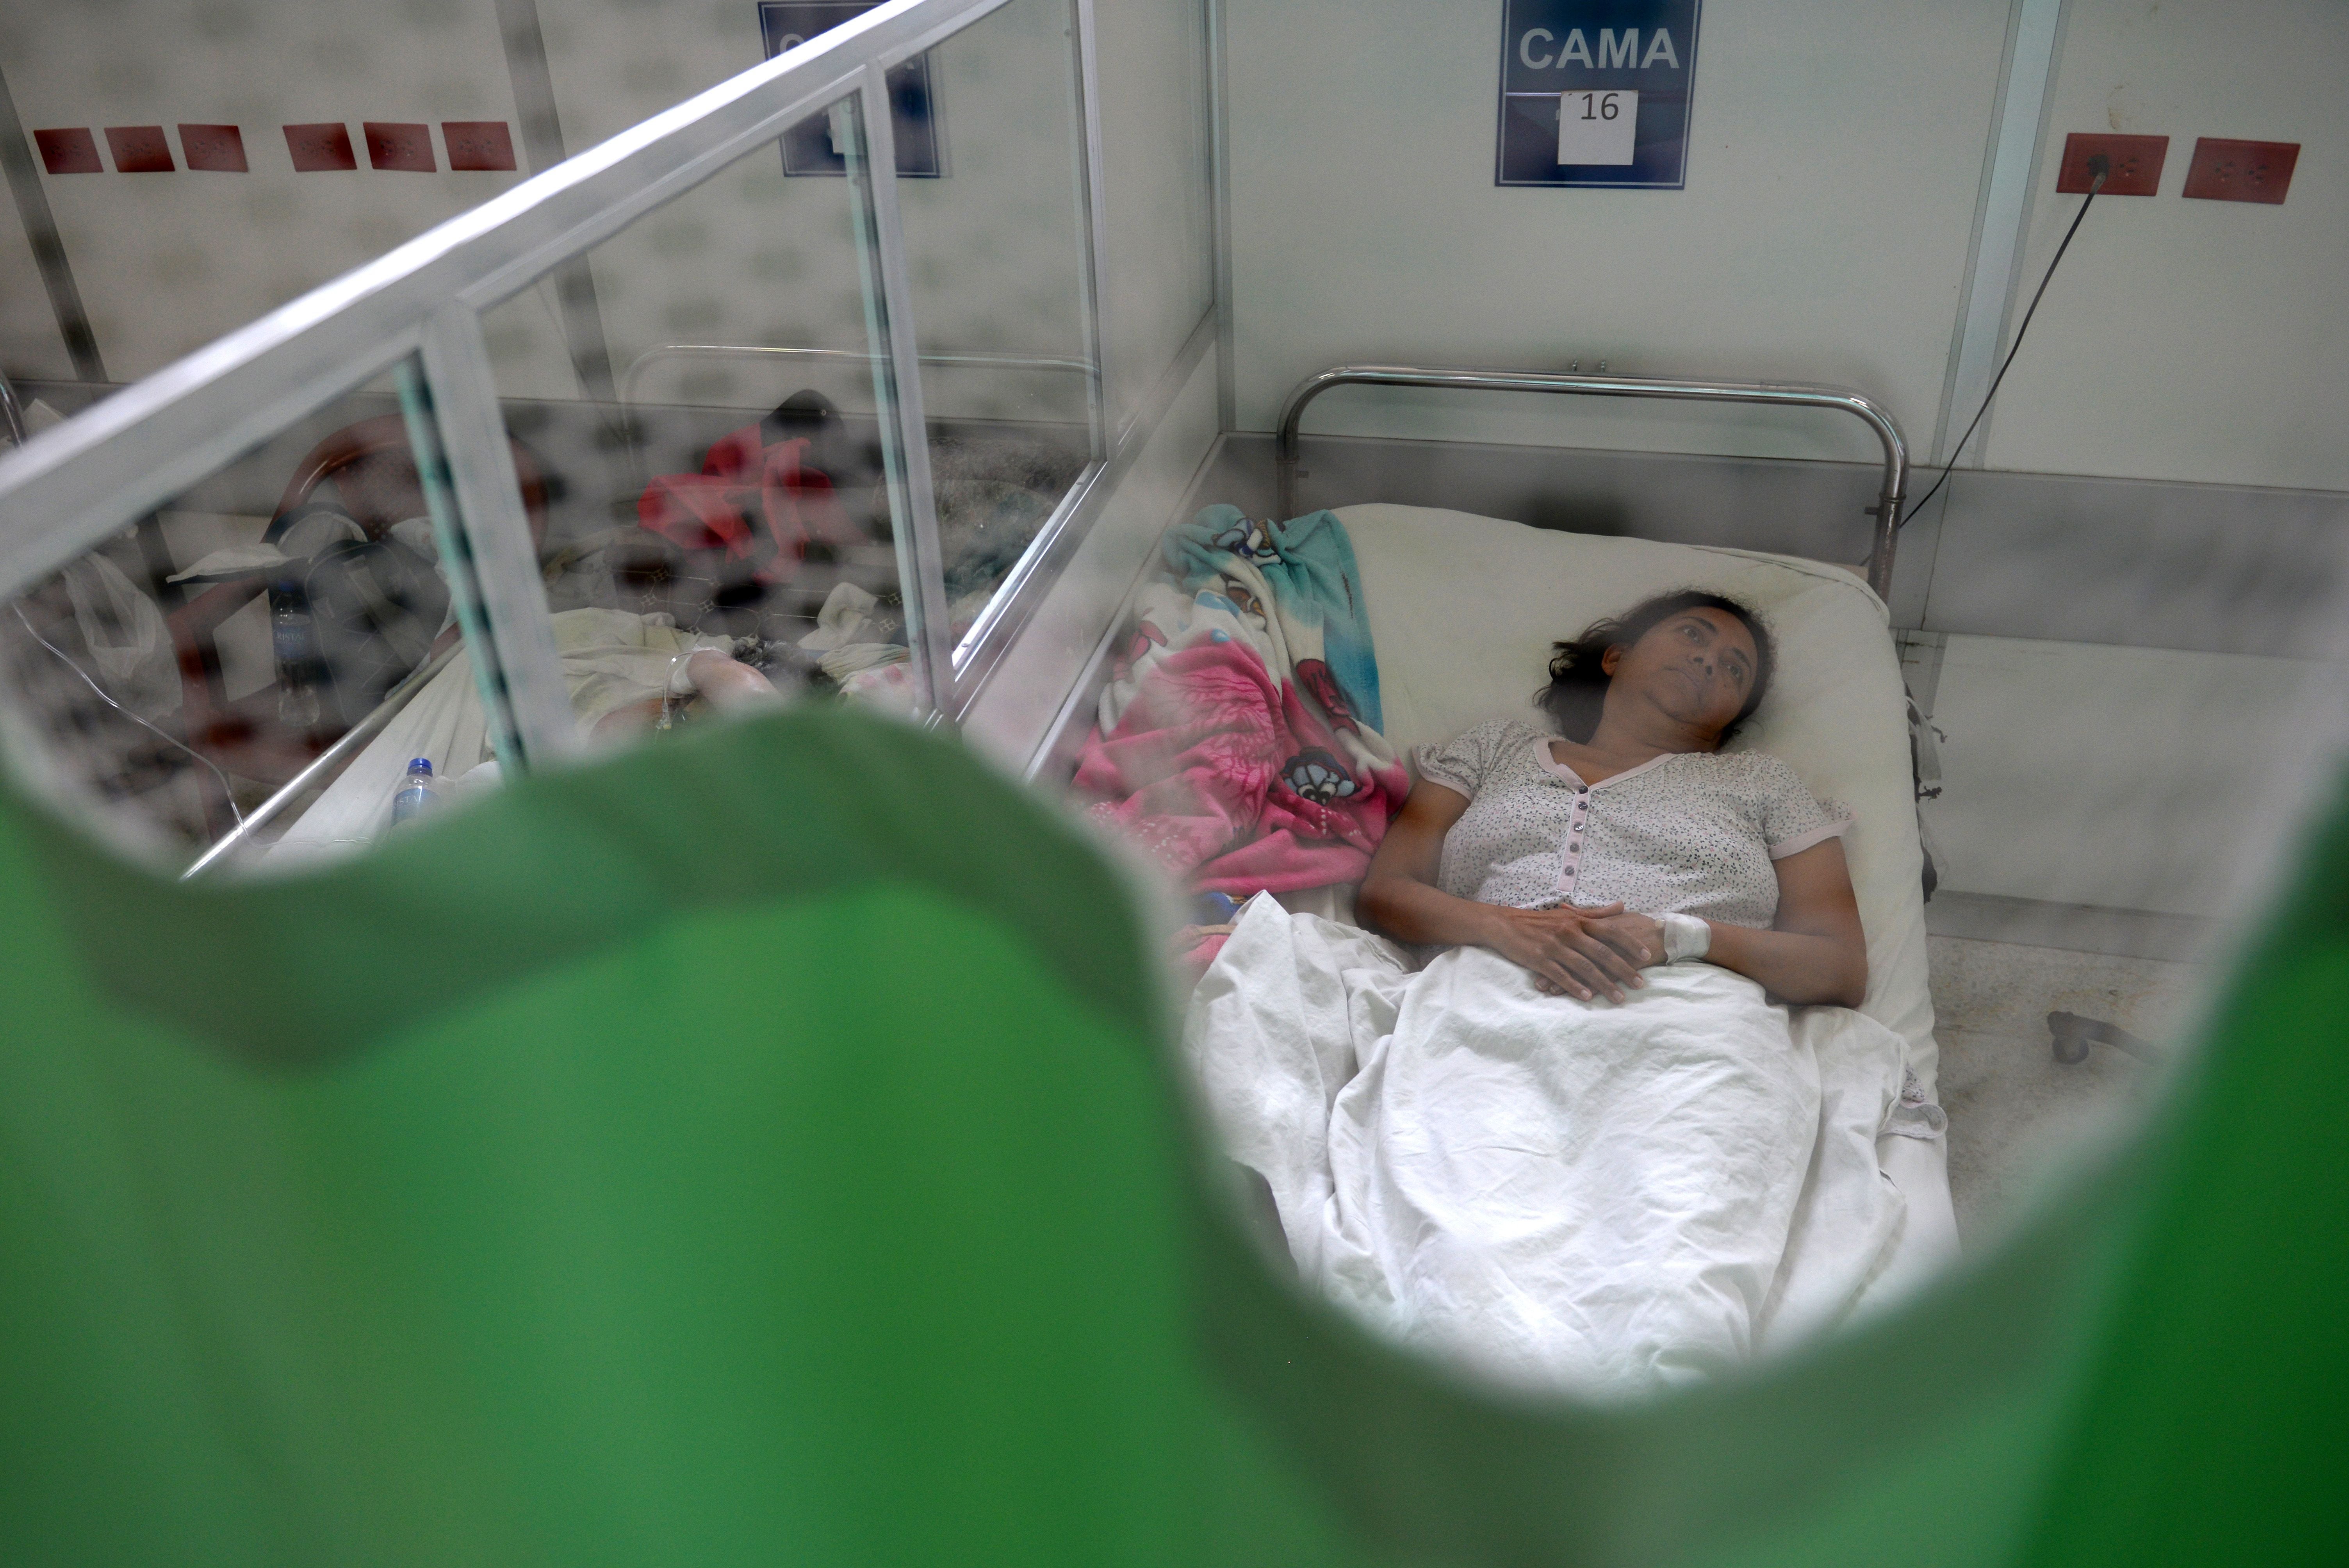 A patient suffering from the Guillain-Barre neurological syndrome recovers in the neurology ward of the Rosales National Hospital in San Salvador, on 27 January, 2016